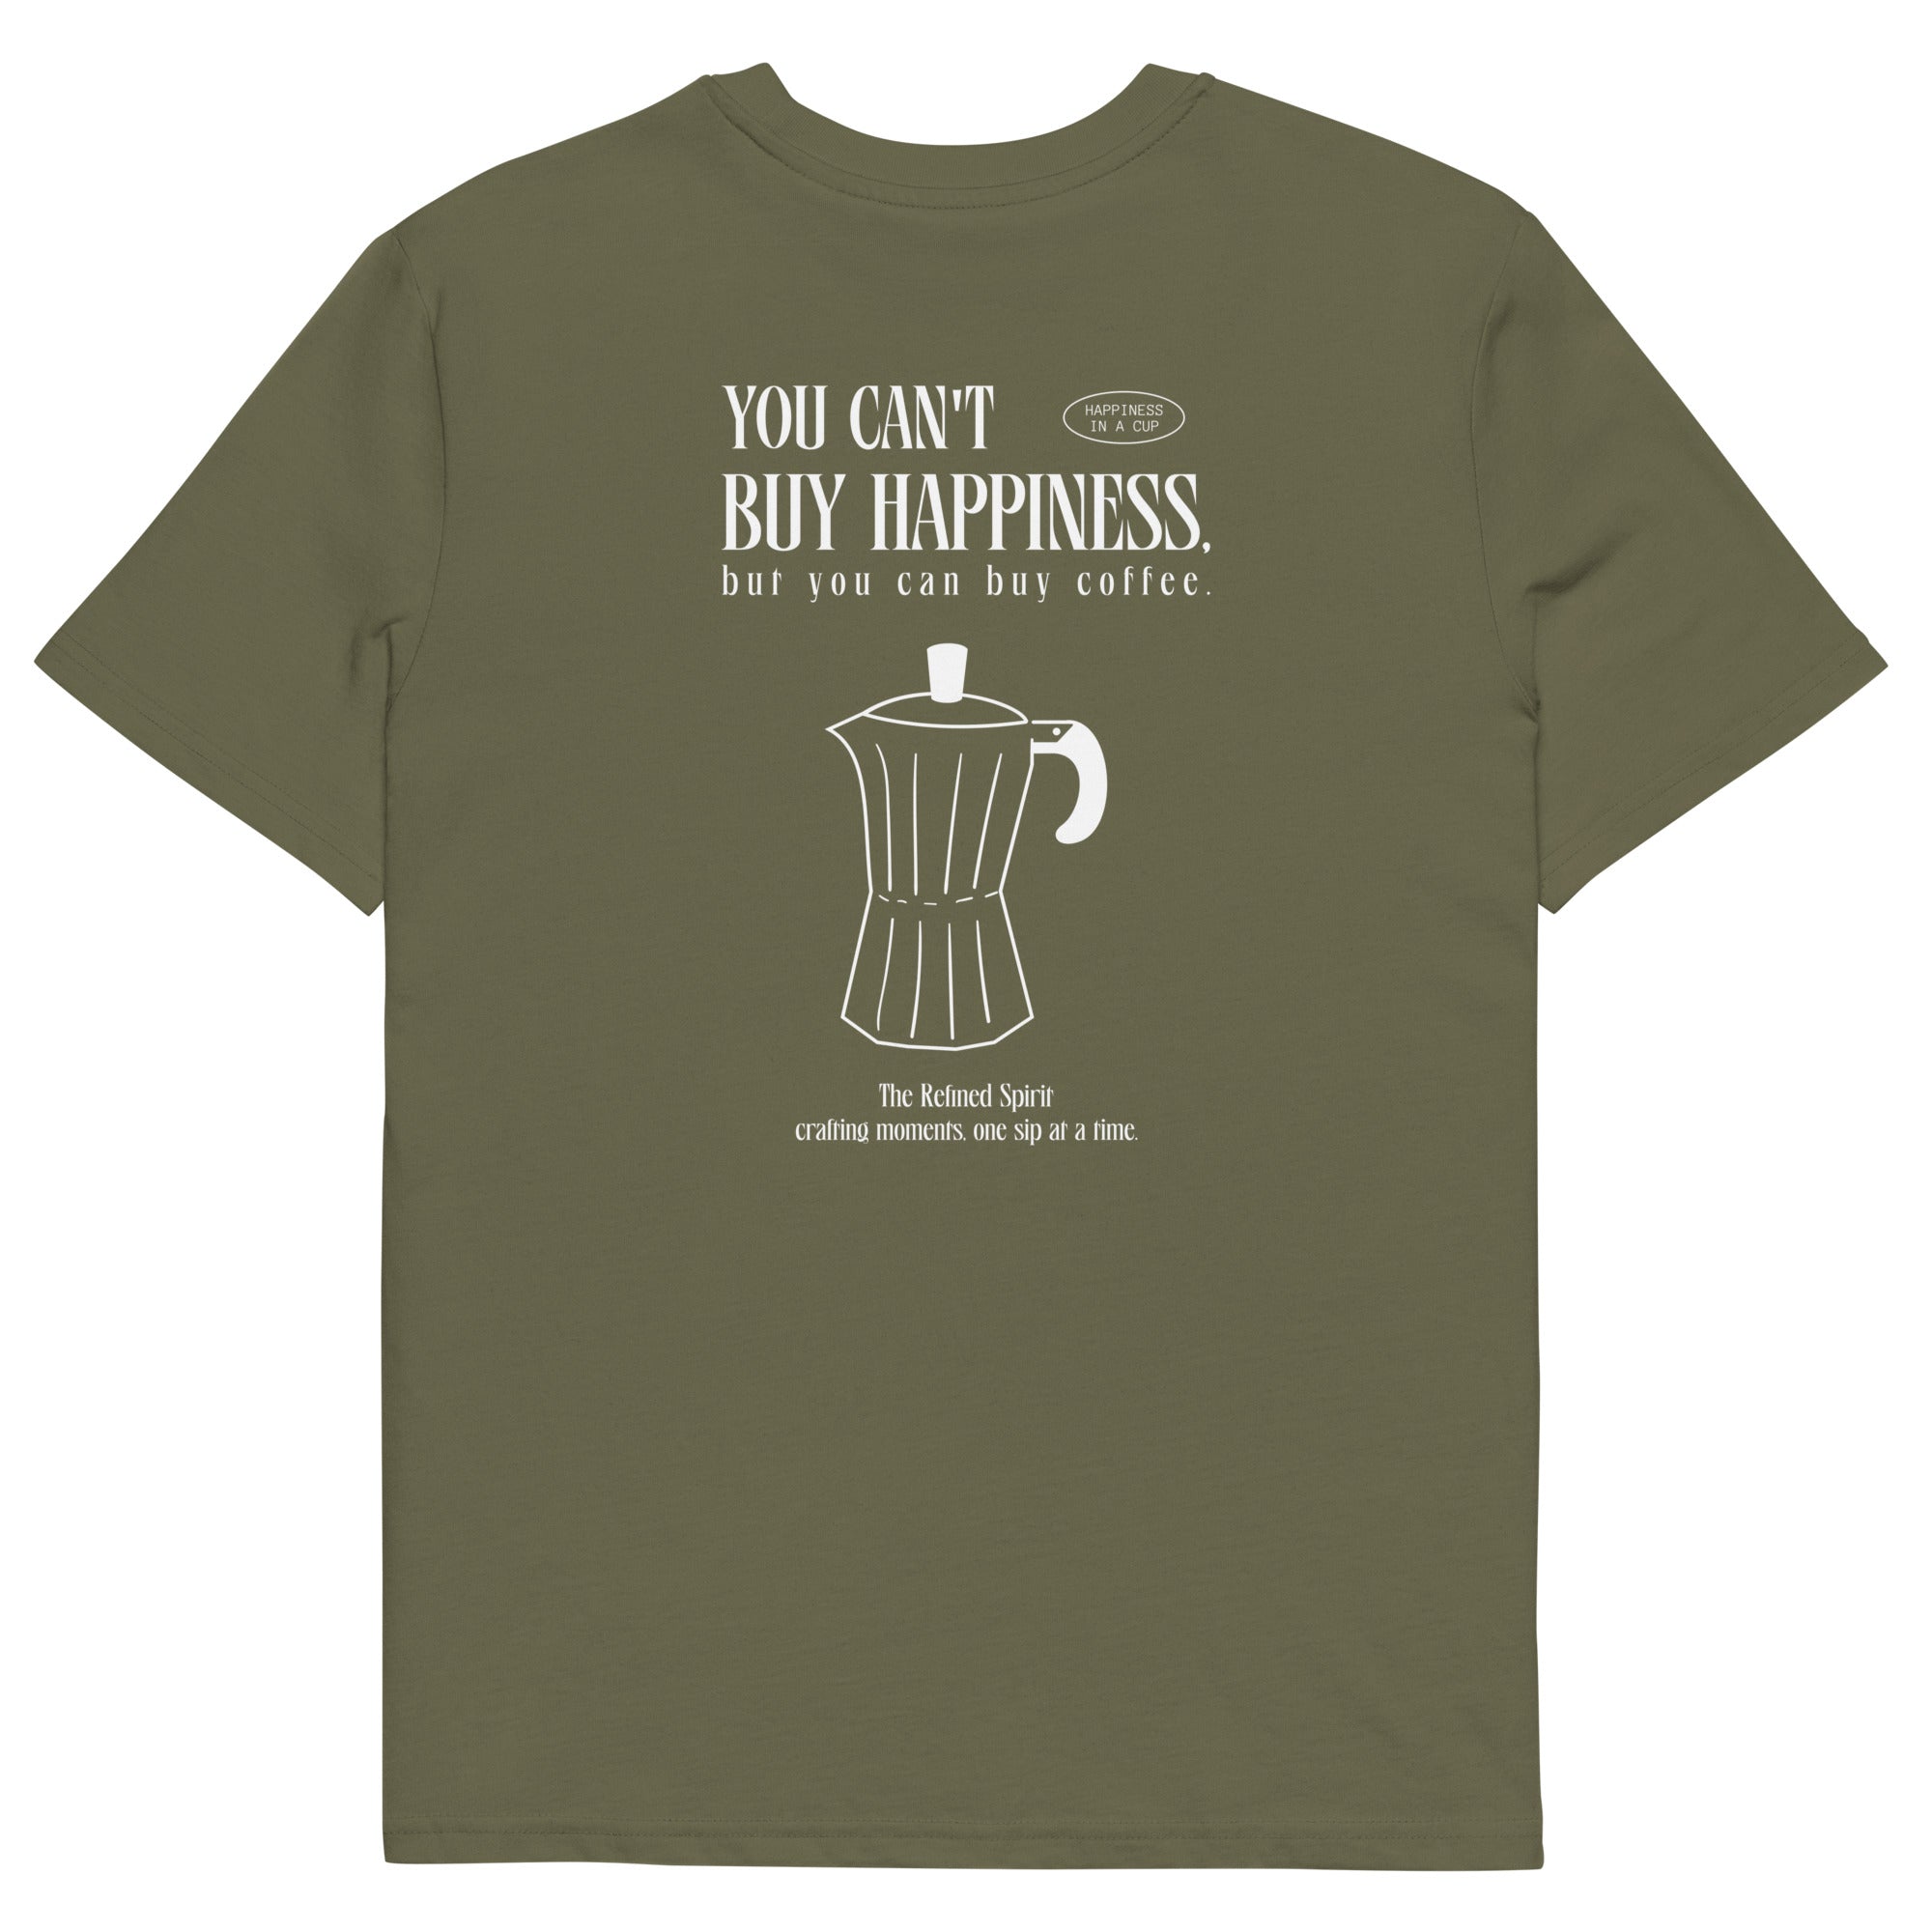 You can't buy happiness but you can buy coffee - Organic T-shirt